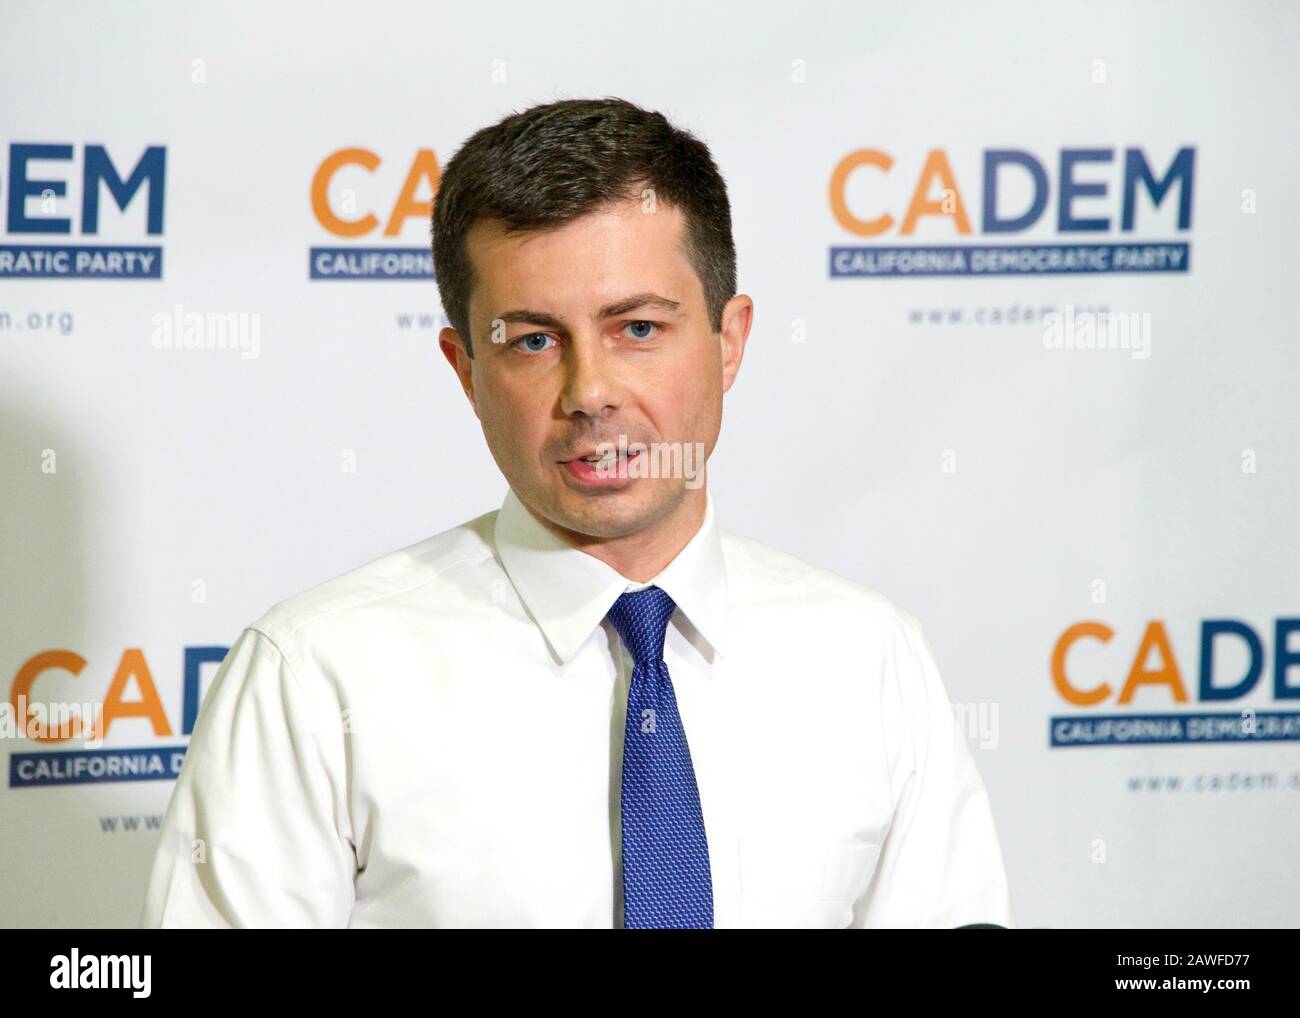 Long Beach, CA - Nov 16, 2019: Presidential candidate Pete Buttigieg speaking at the Democratic Party Endorsing Convention in Long Beach, CA Stock Photo